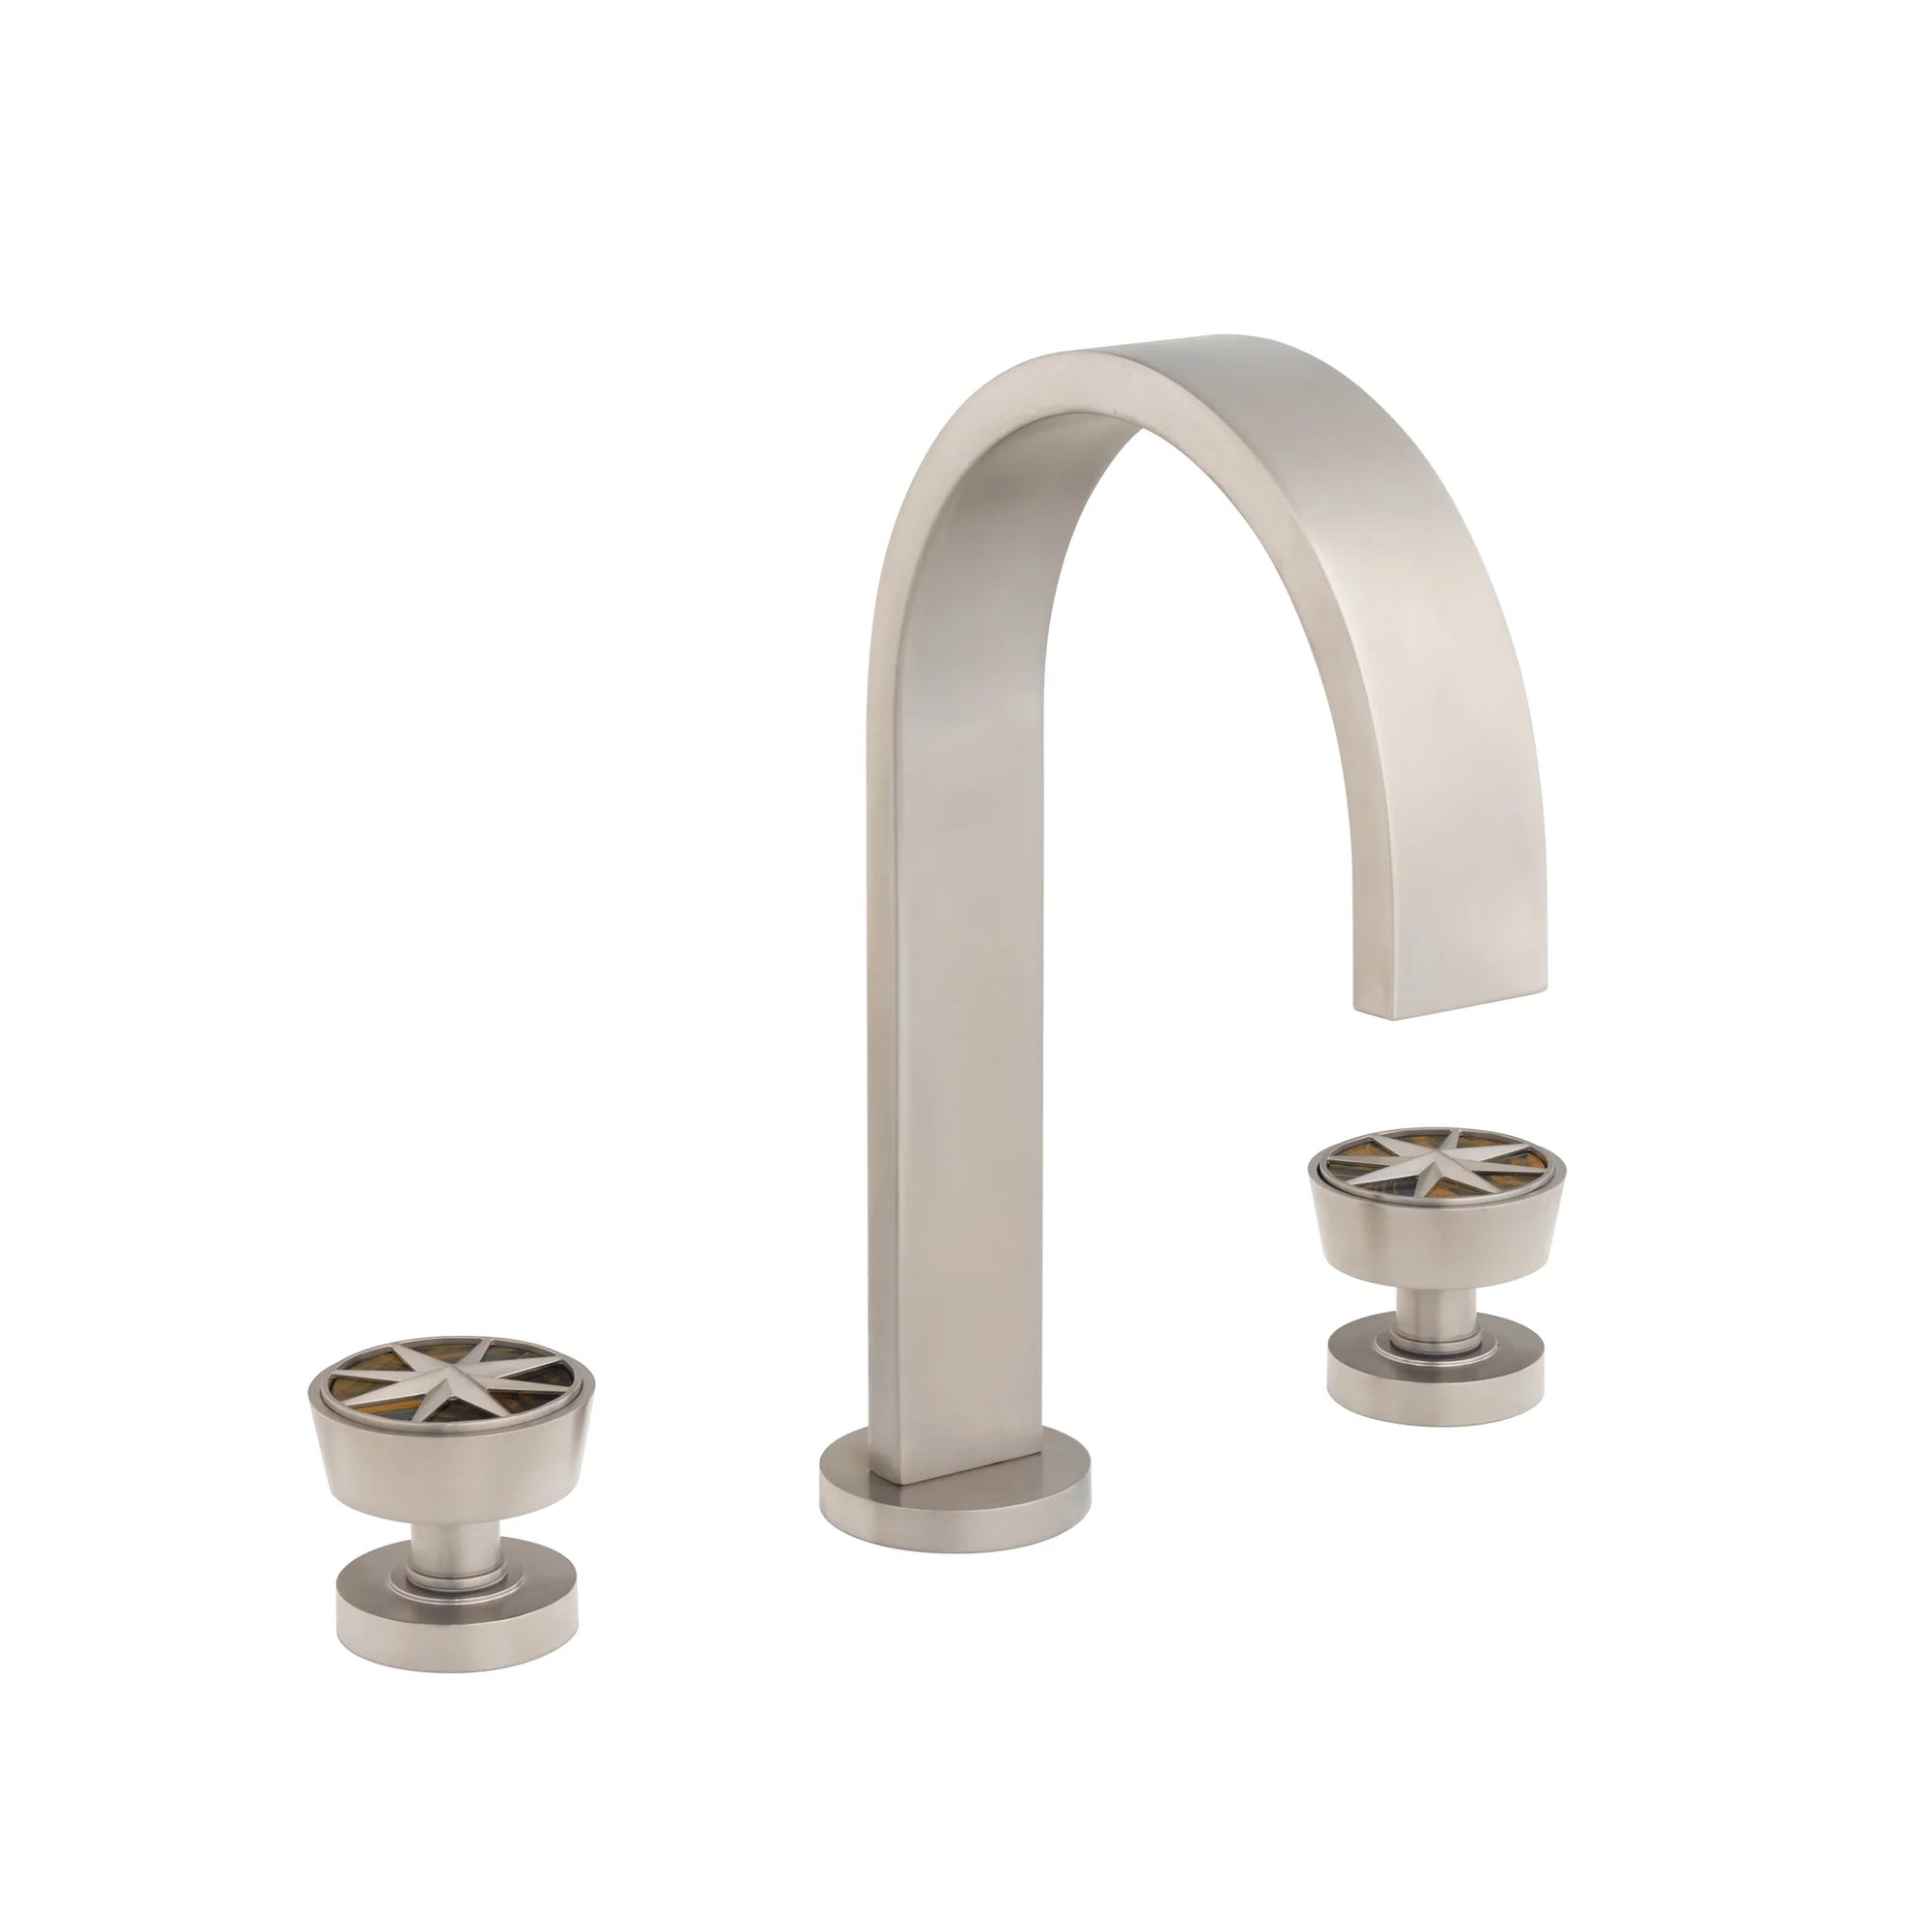 2176BSN101-BLTI-BN Sherle Wagner International Blue Tiger Eye insert Arbor with Compass Stone Insert Knob Faucet Set in Brushed Nickel metal finish